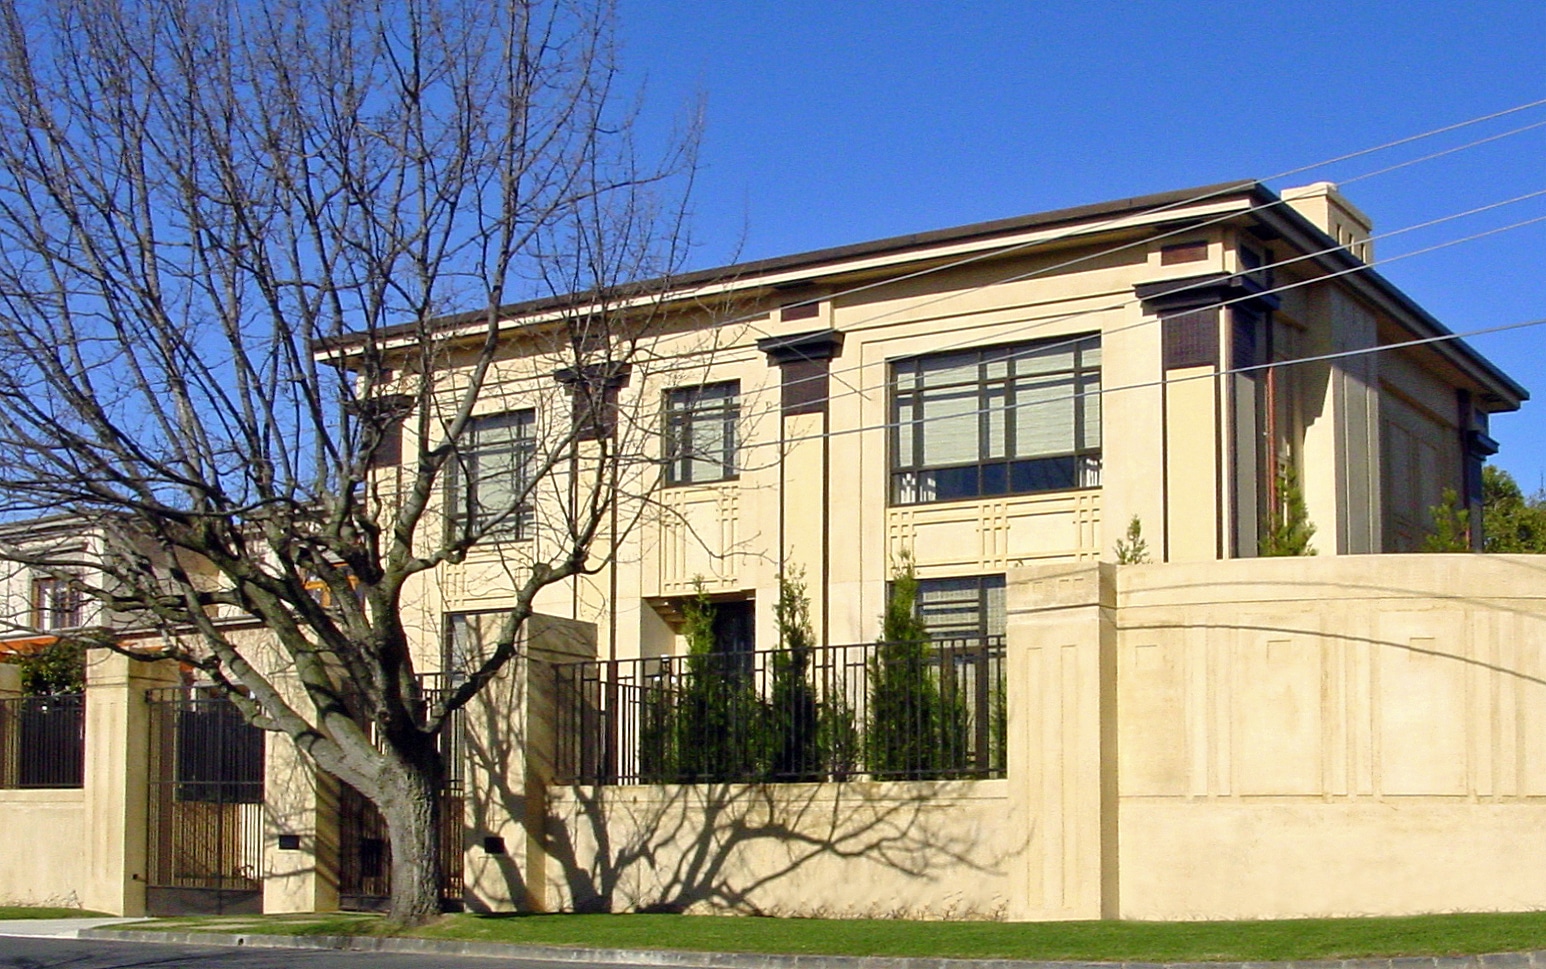 72dpi NeoClassical Toorak H 0000 1 - Projects